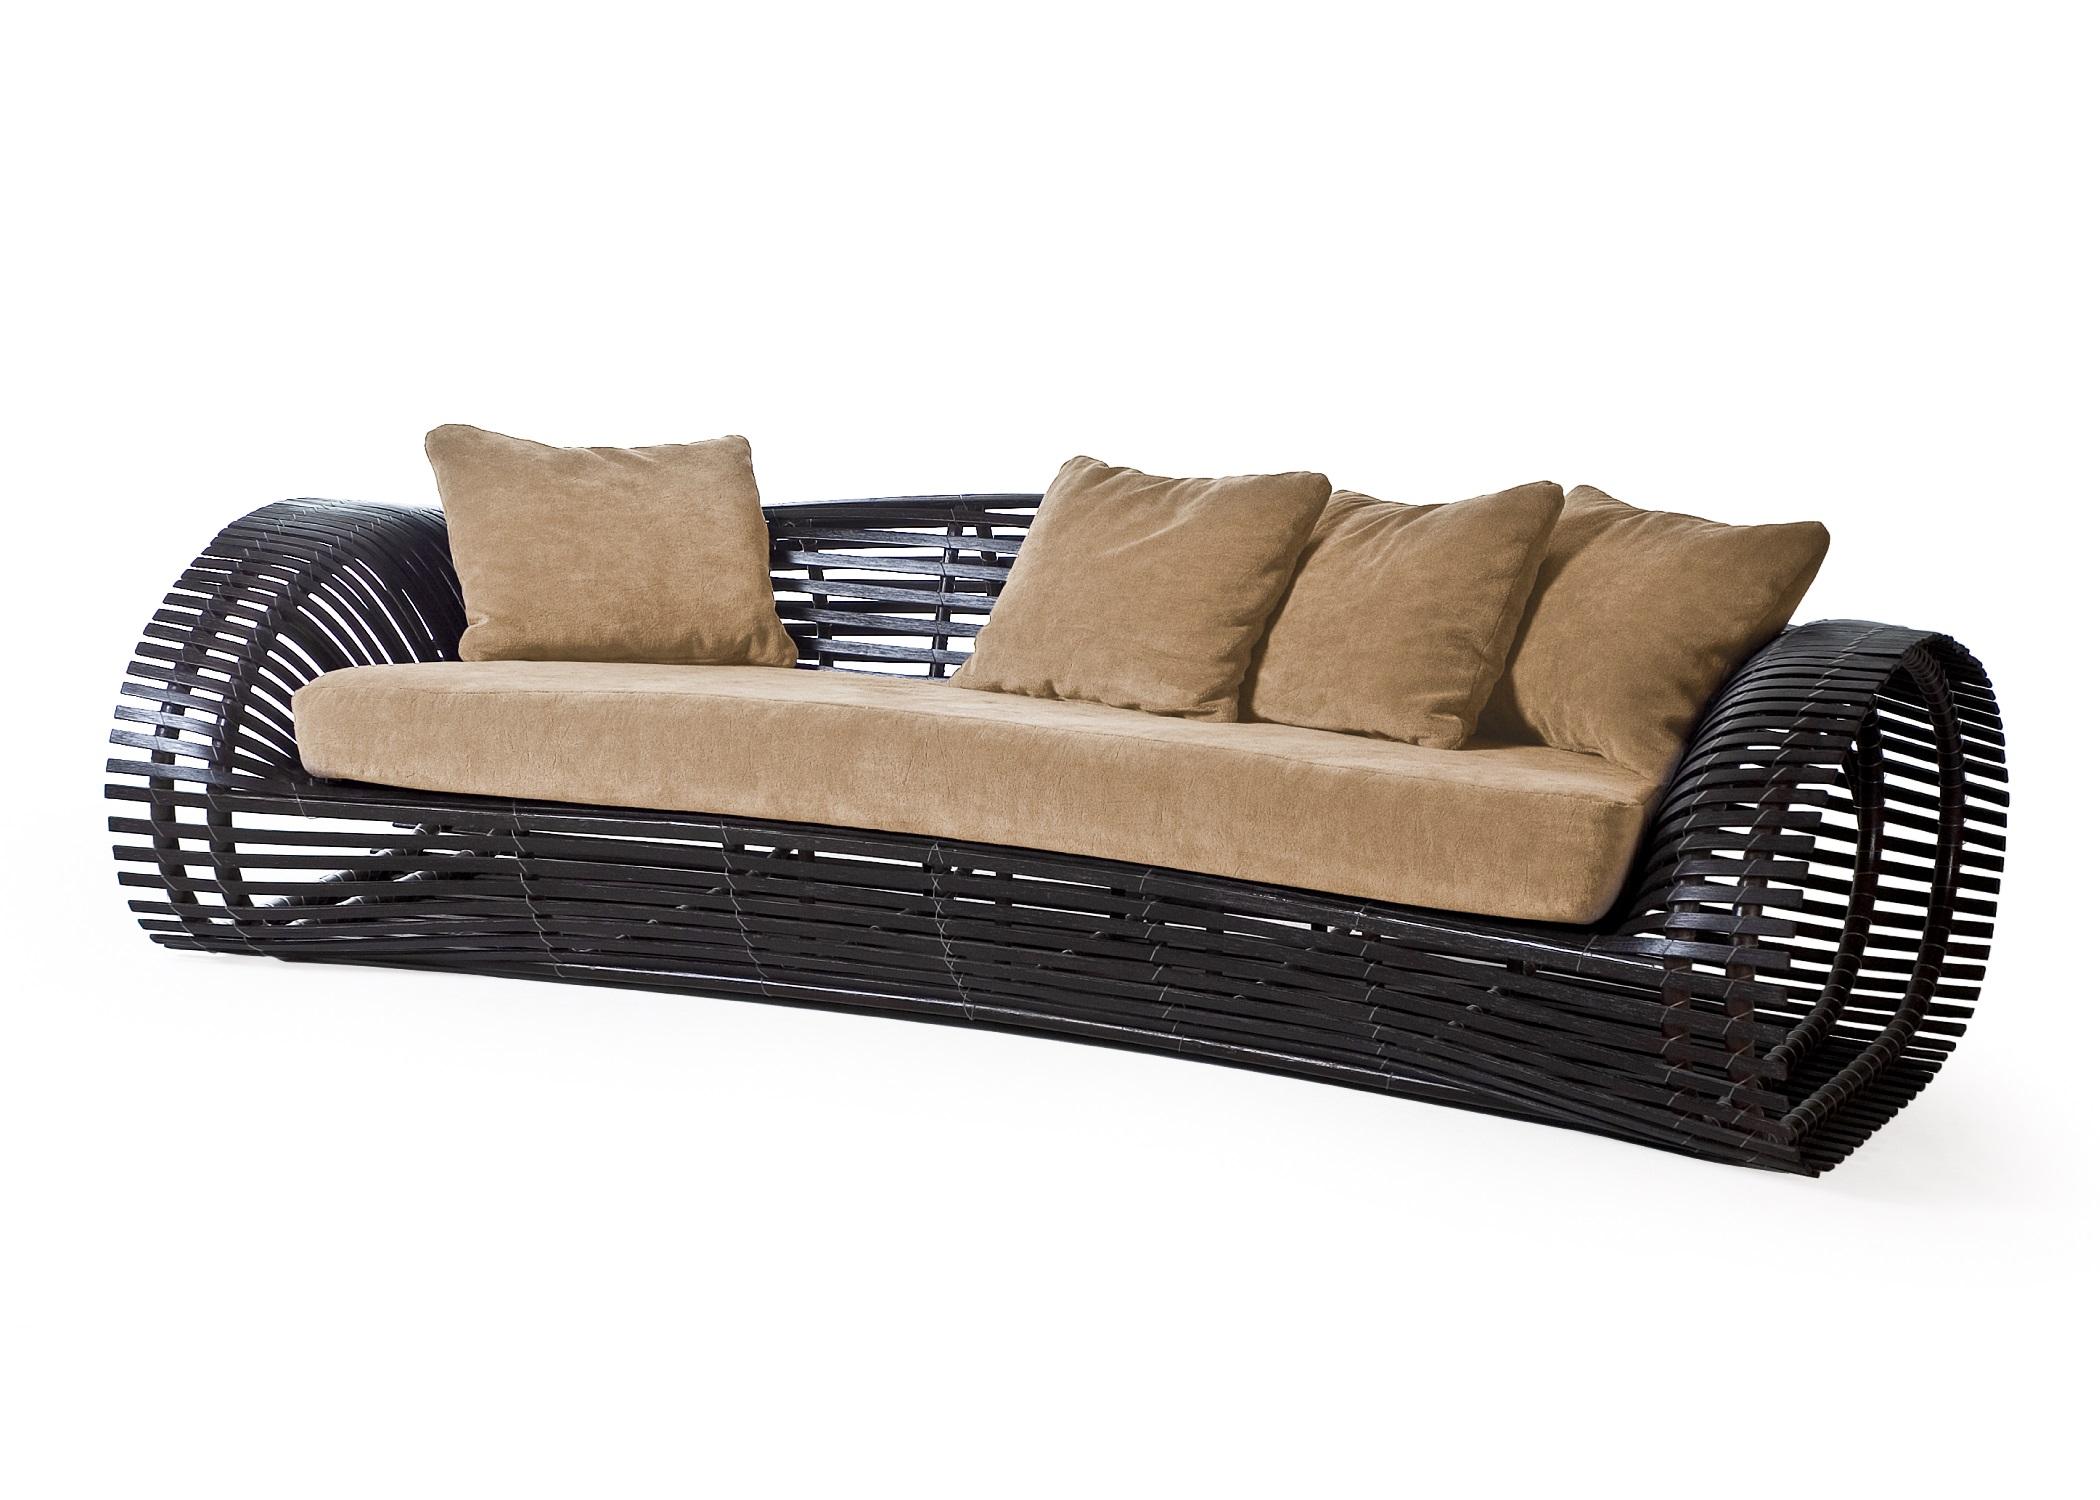 Outdoor Lolah sofa by Kenneth Cobonpue
Materials: Polyethelene, aluminum.
Also available in other colors and for indoors. 
Dimensions: 120 cm x 240 cm x H 72 cm

Created using construction techniques similar to boat-building, Lolah entices the